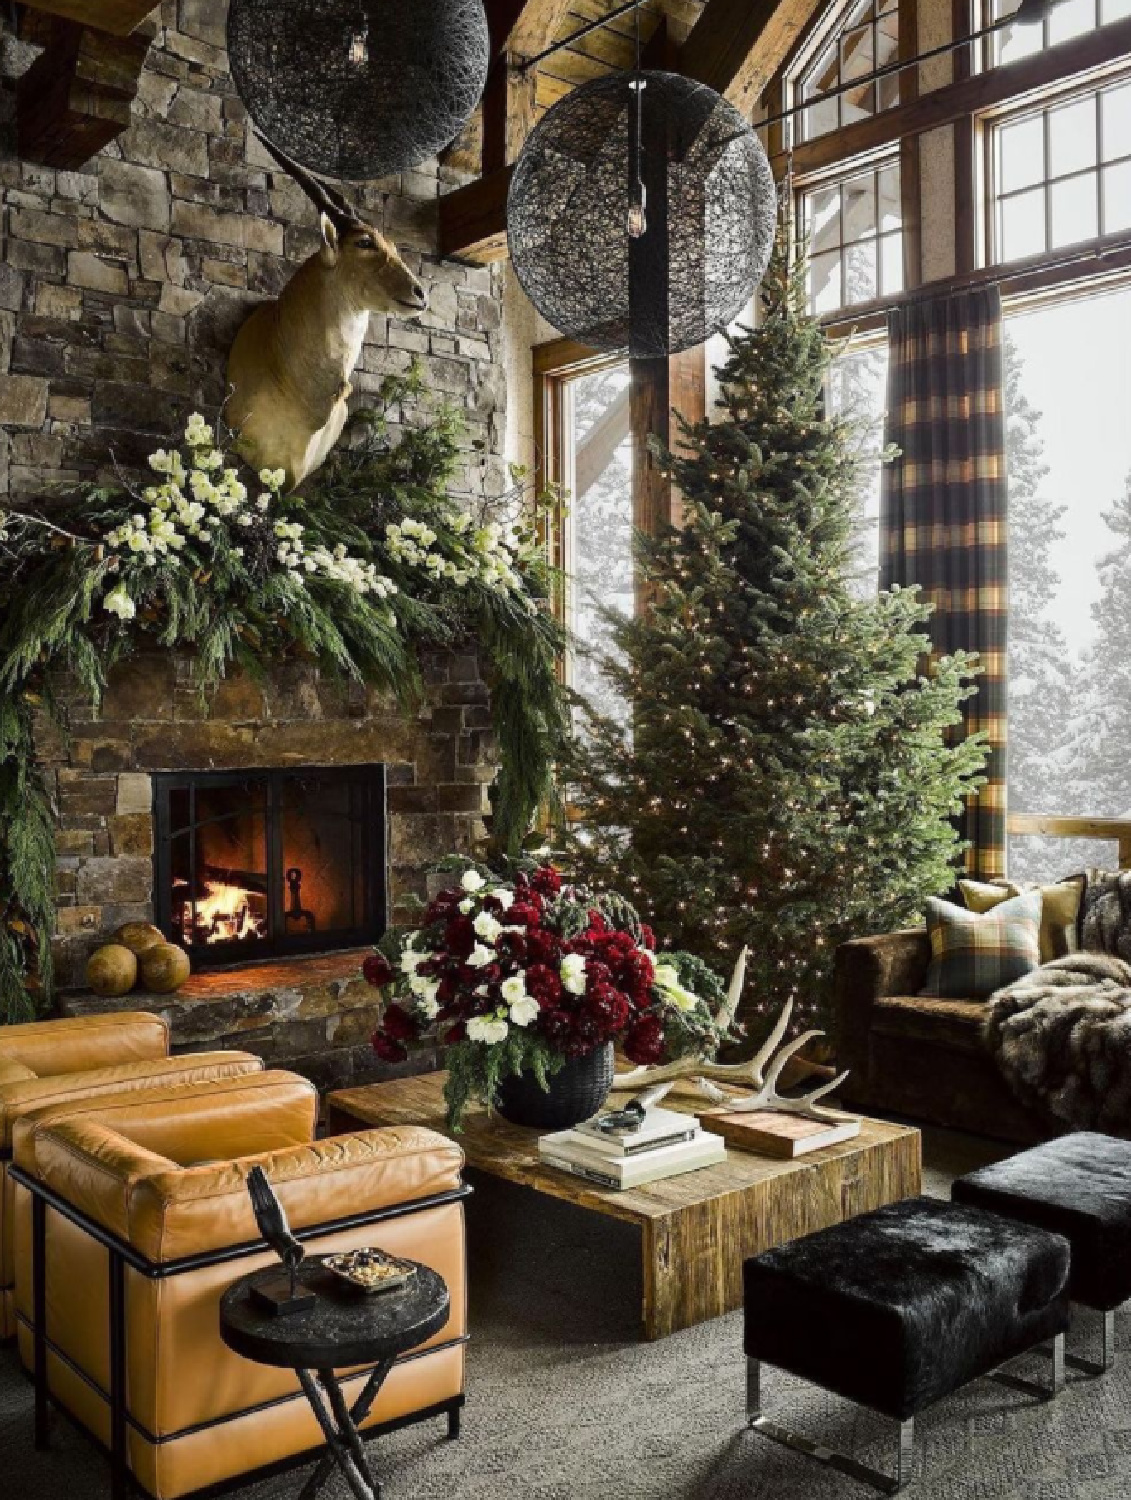 Mountain lodge chic family room in Yellowstone Club with luxe interior design by Ken Fulk. #mountainchic #kenfulk #yellowstoneclub